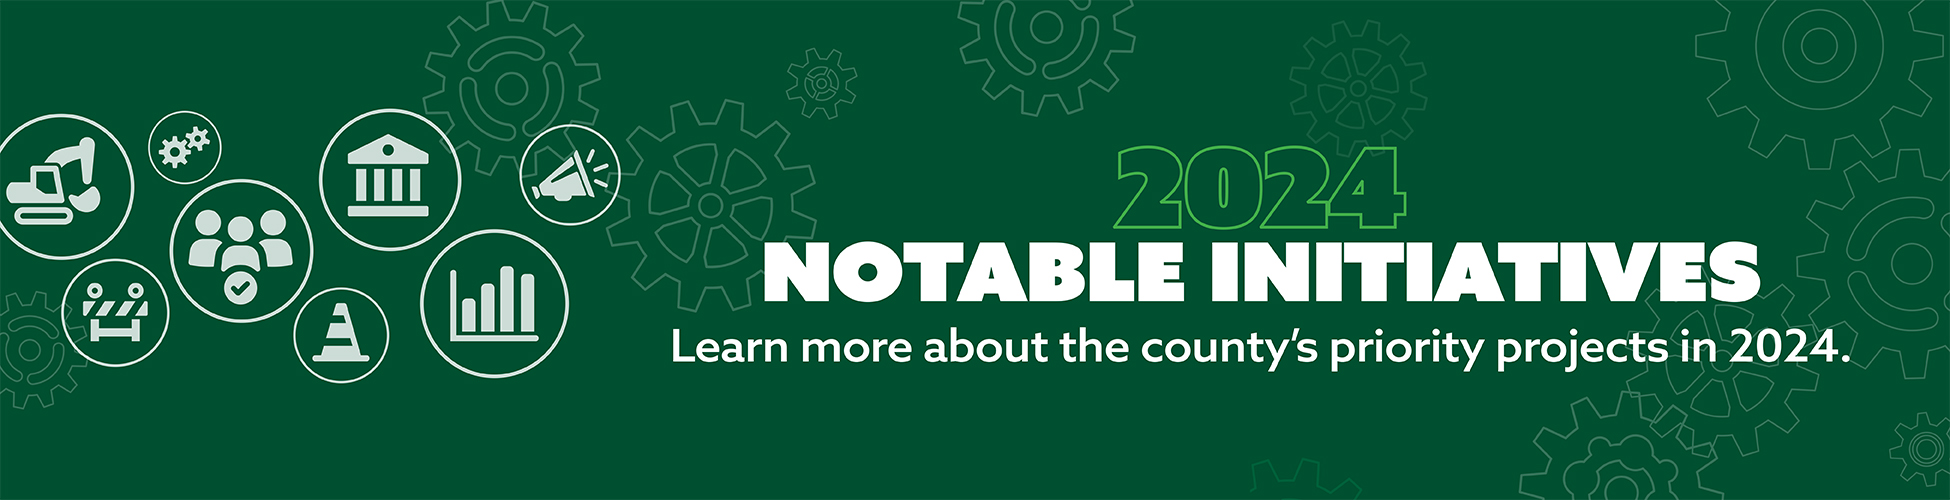 2024 Notable Initiatives - Learn more about the county's priority projects in 2024.